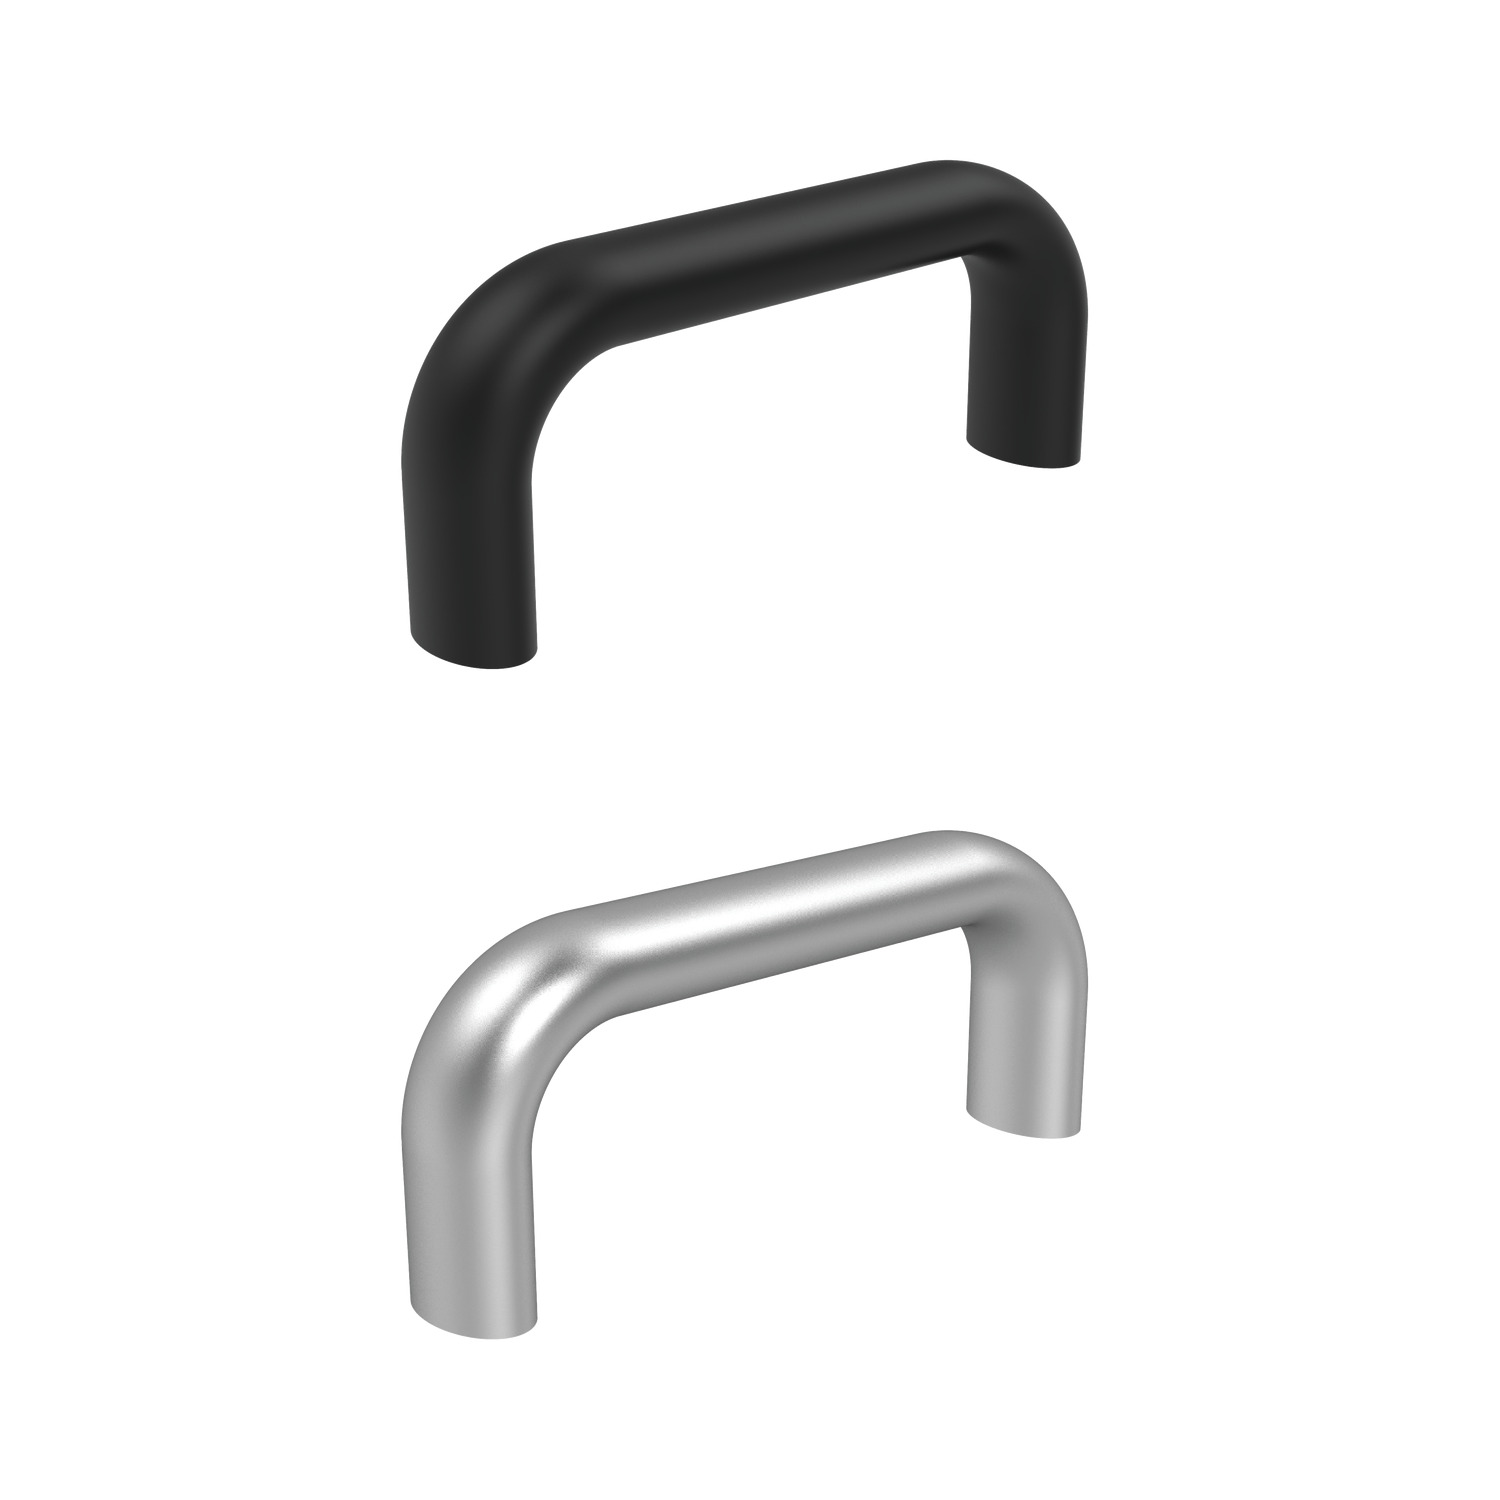 Cabinet Handles Rear mounting cabinet handles available in natural silver finished aluminium or black plastic coated.